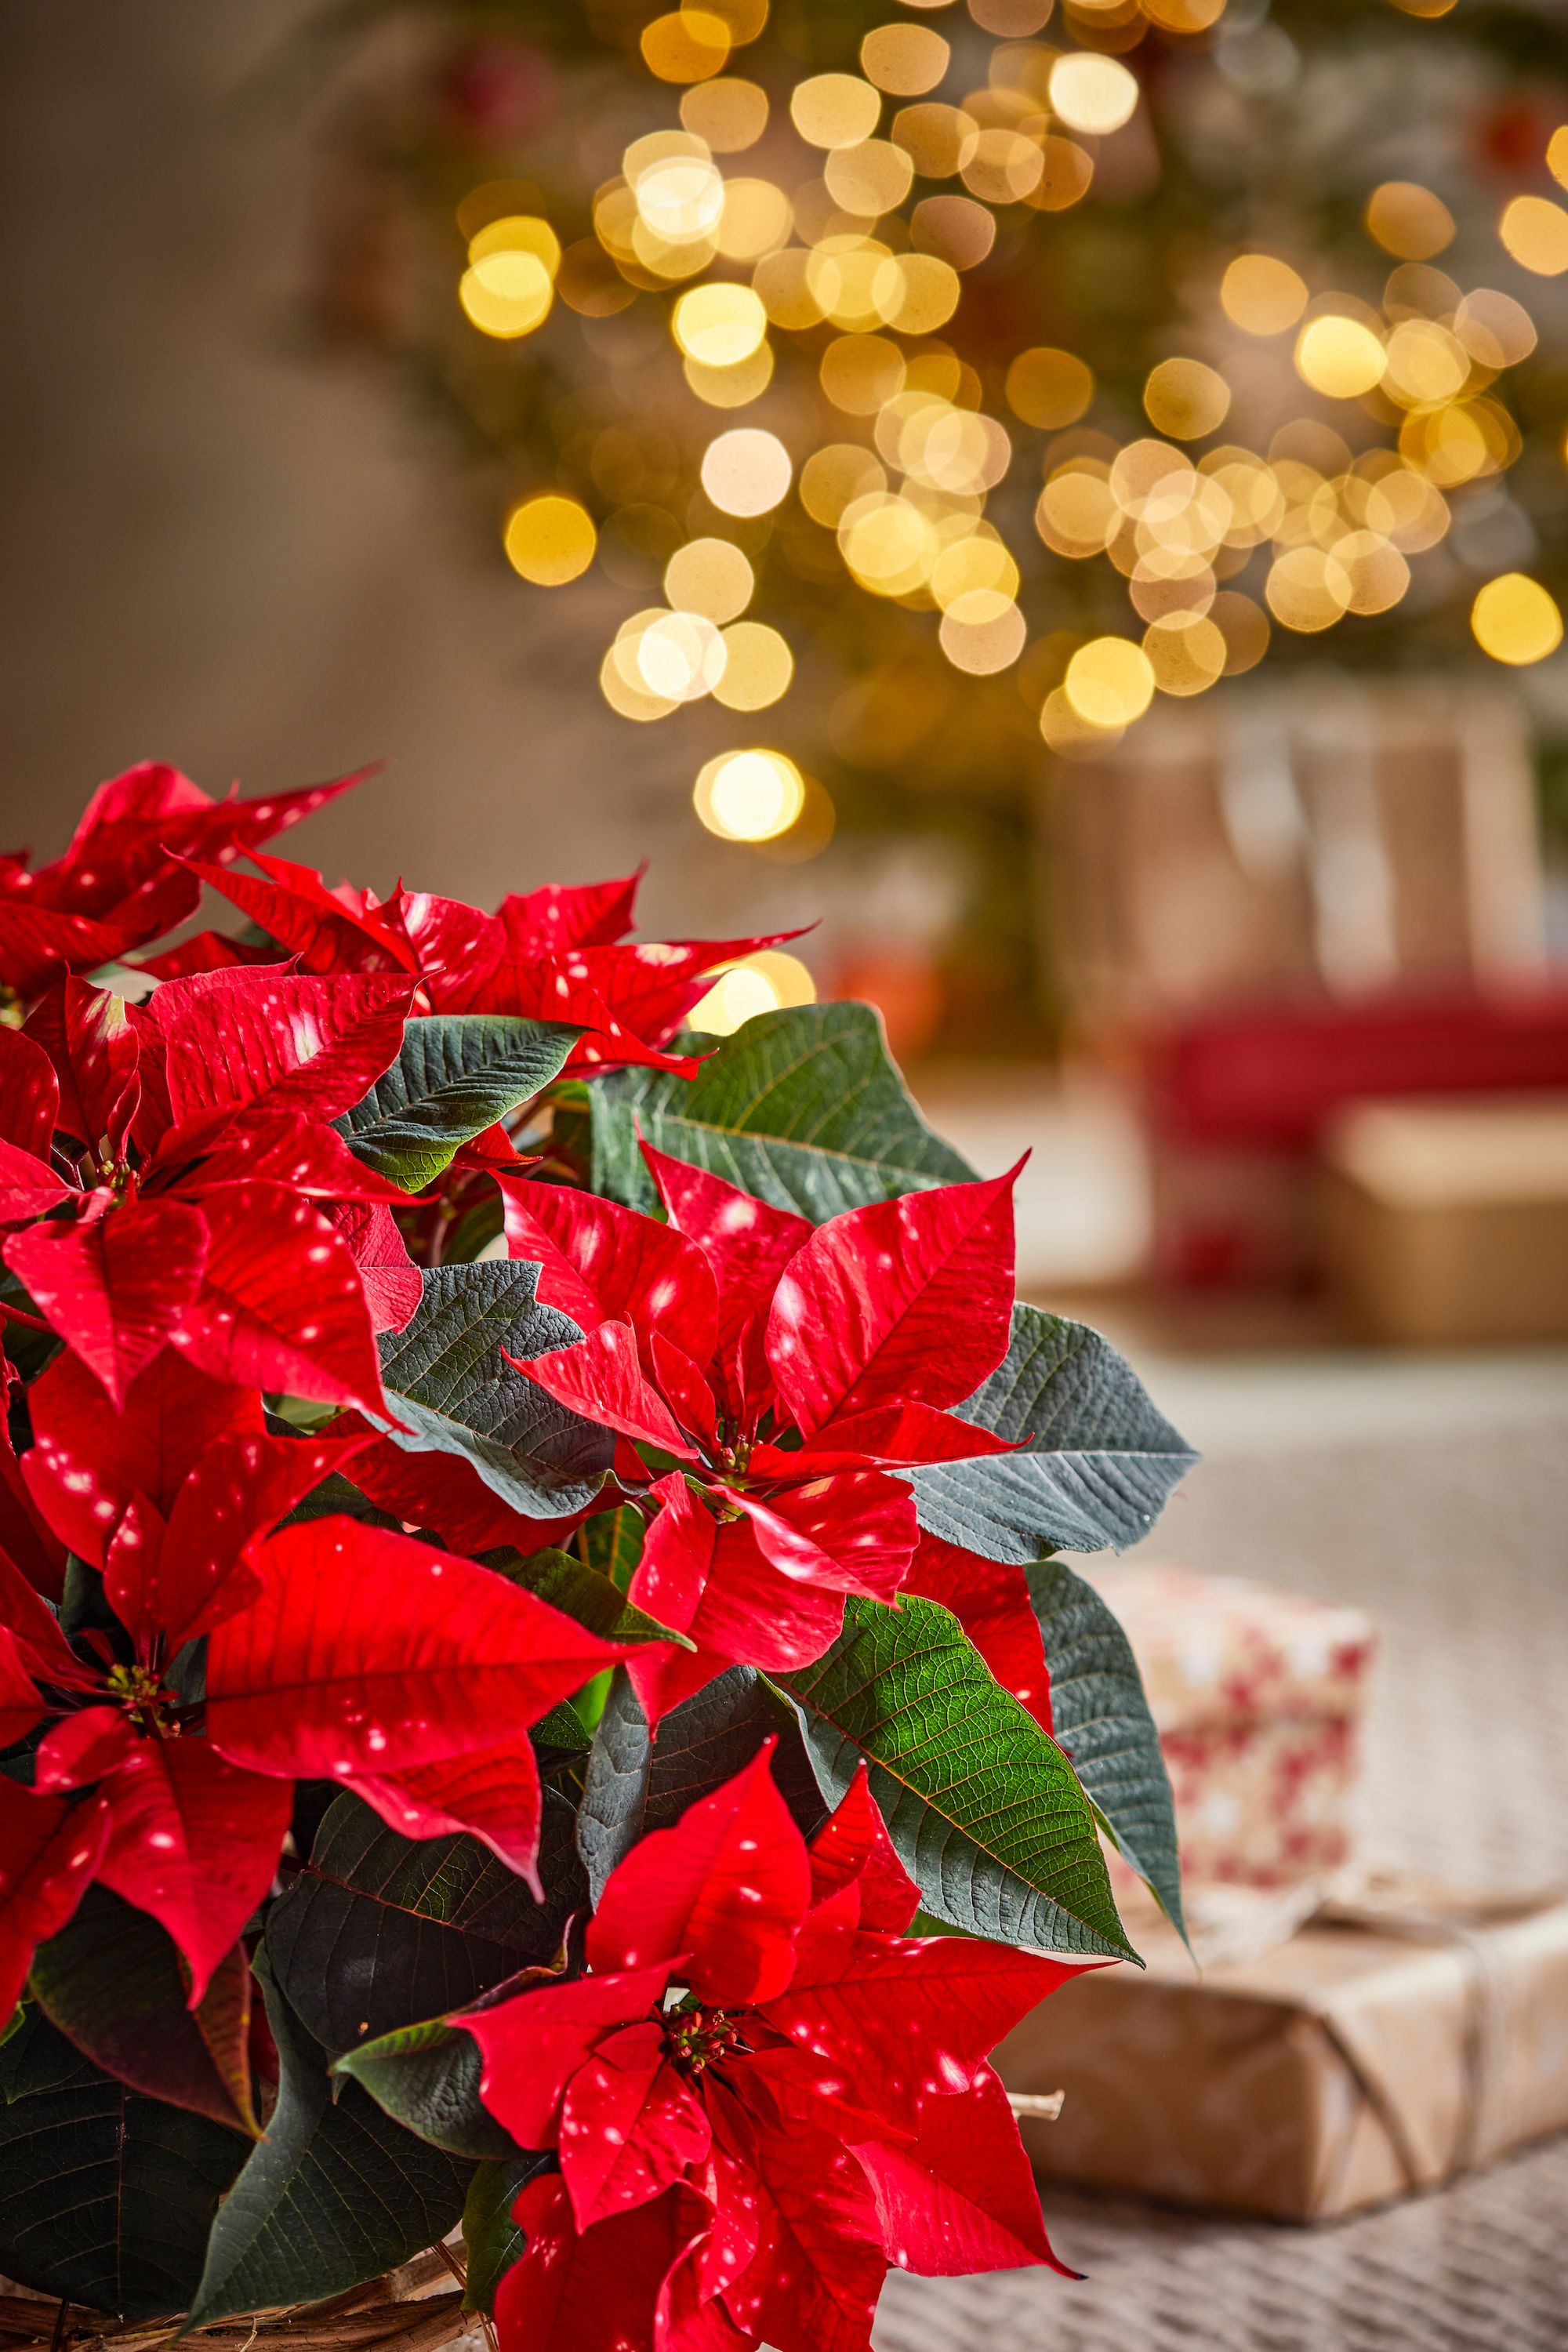 Easy Ways to Make Your Plants Pop for the Holidays